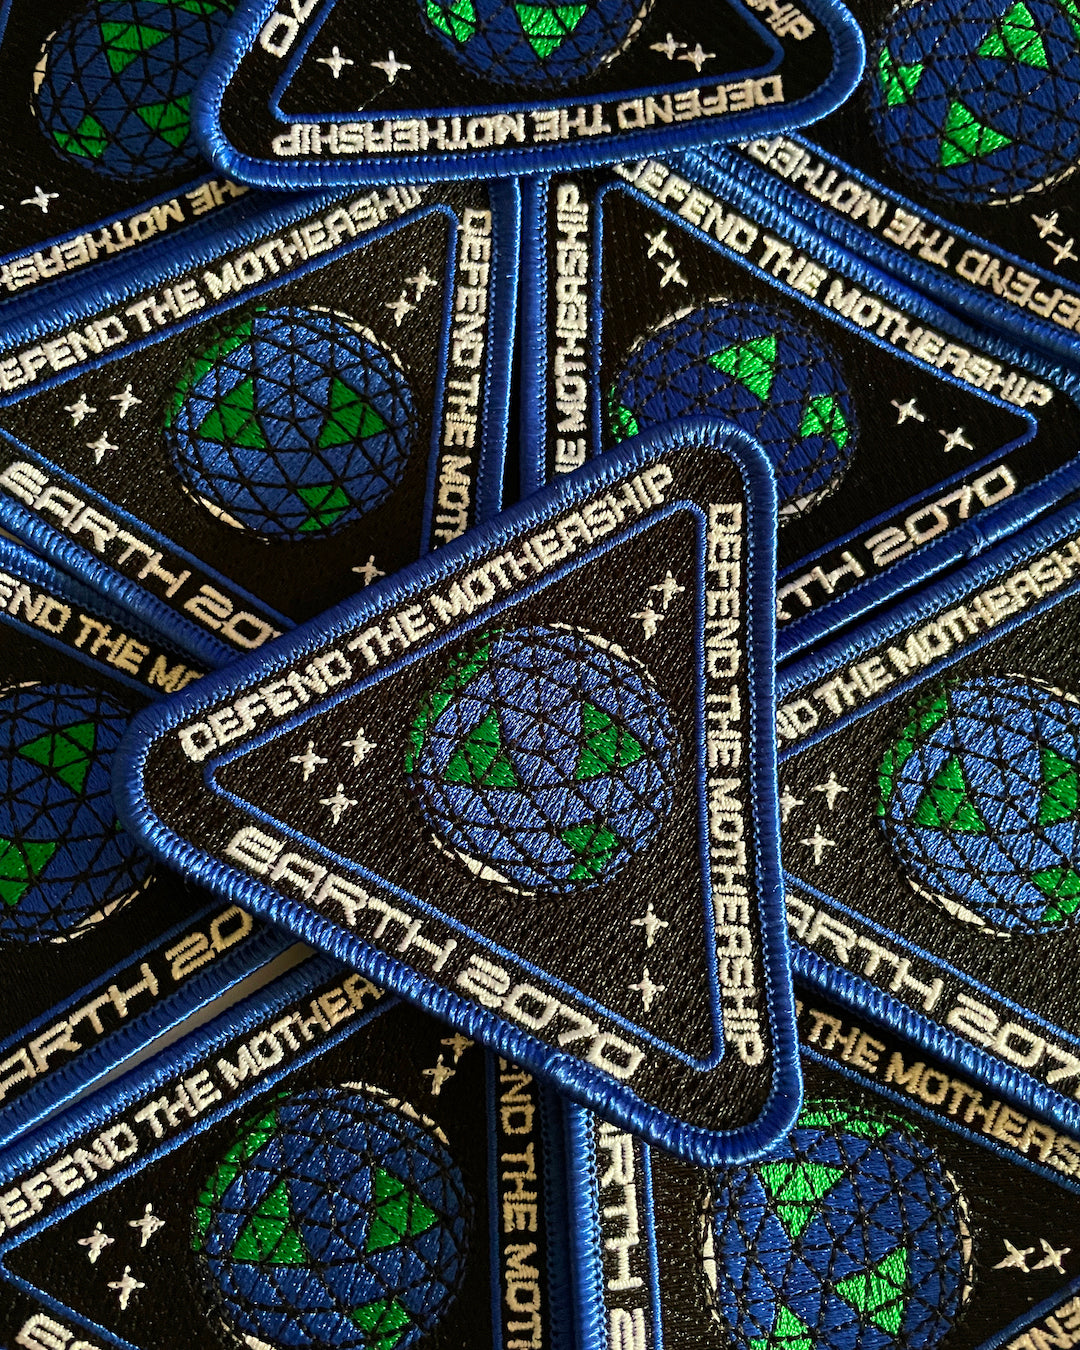 EARTH 2070 MISSION PATCH